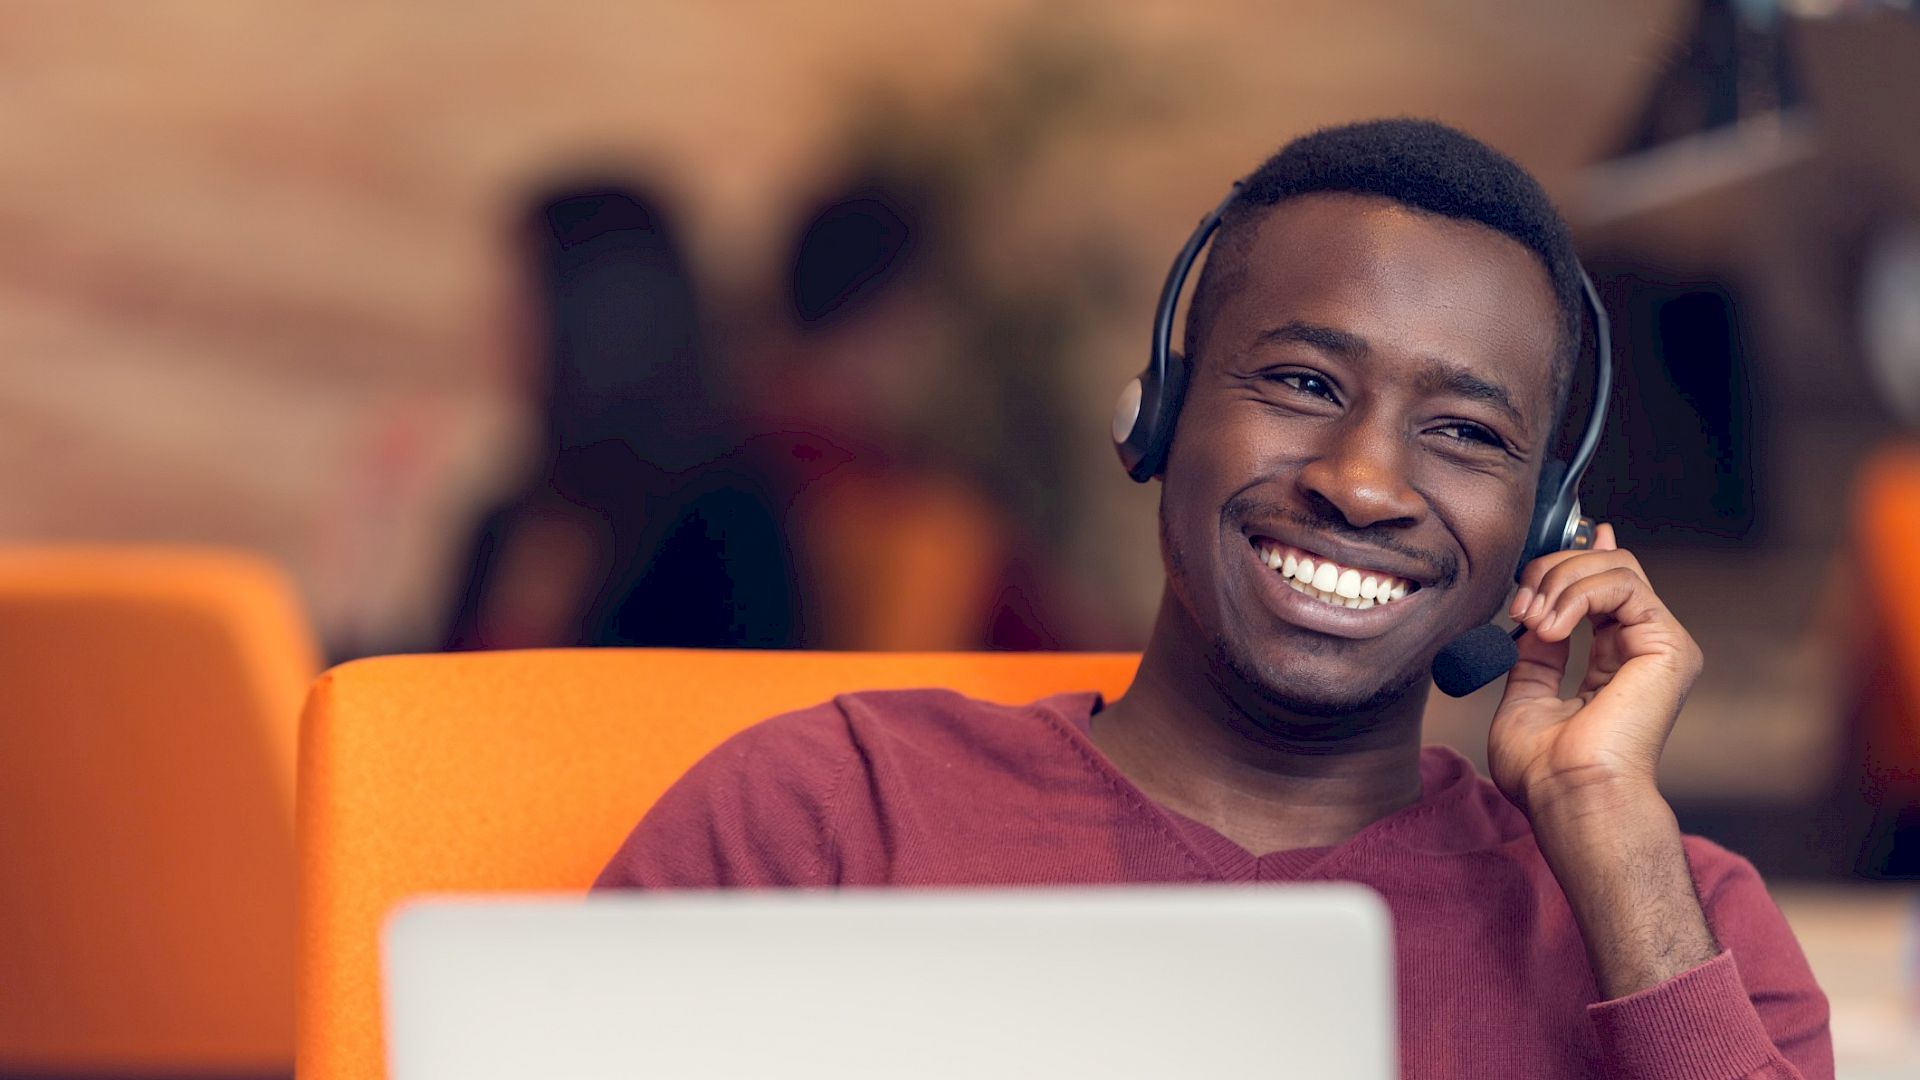 young smiling customer service agent wearing a headset